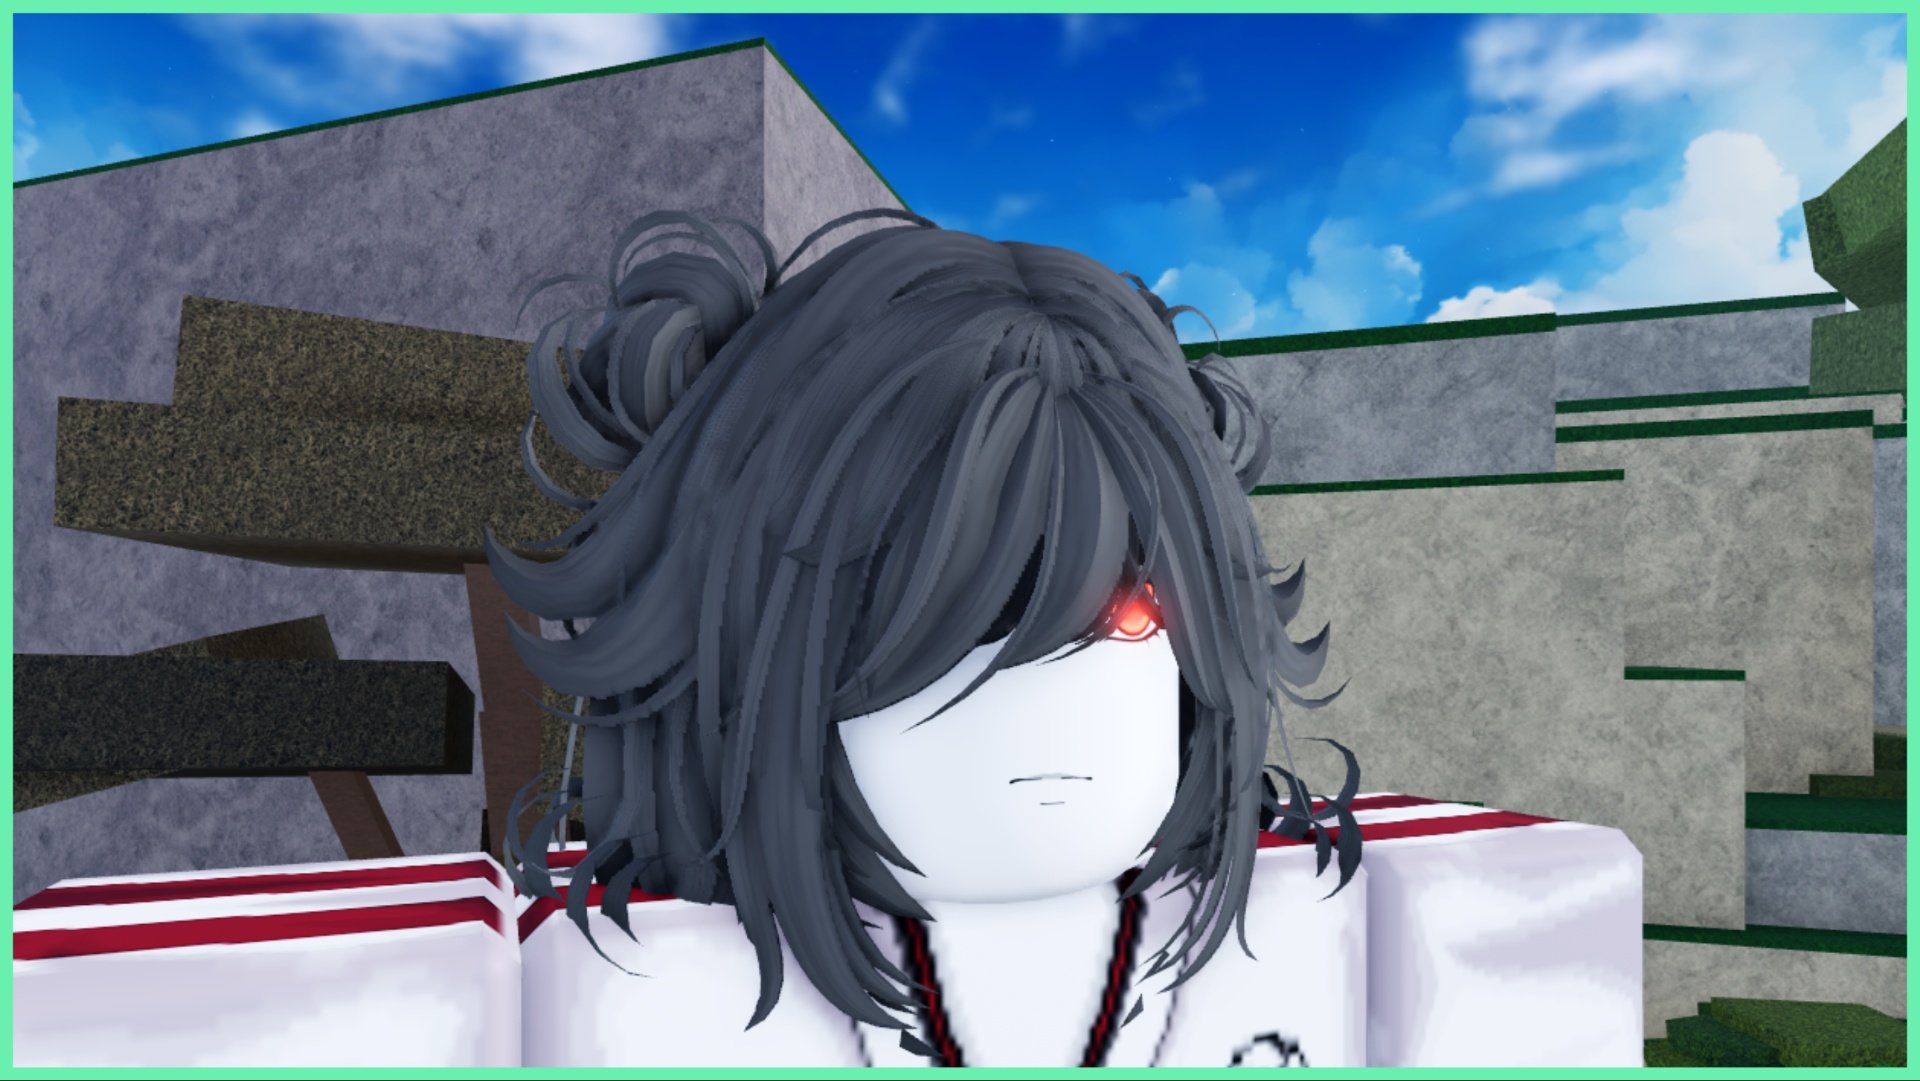 The image shows my avatar up close. She has pale white skin and a glowing red eye beneath grey bangs. Behind her is a rocky hill face littered with grass